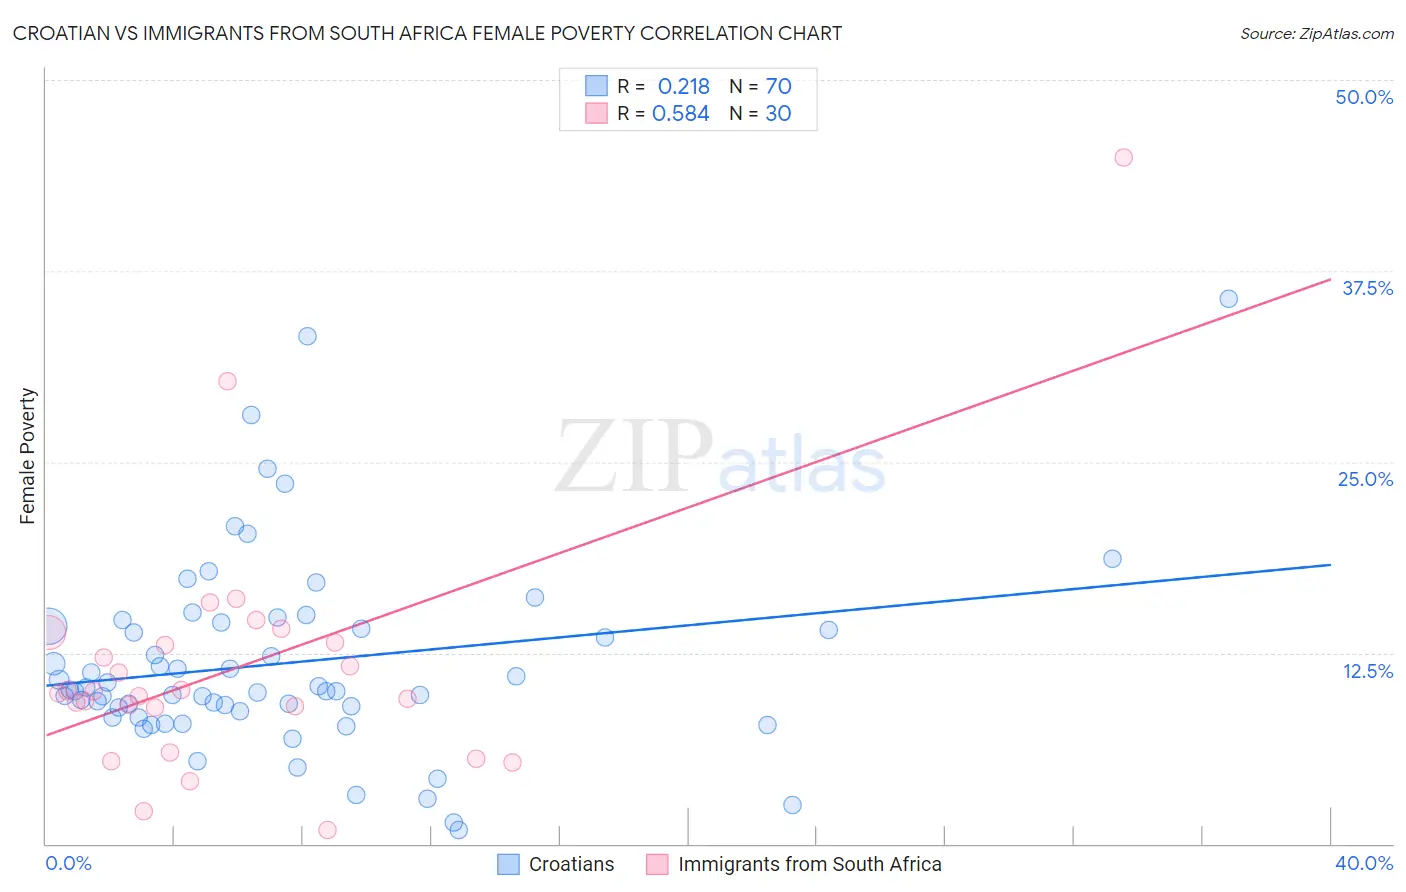 Croatian vs Immigrants from South Africa Female Poverty